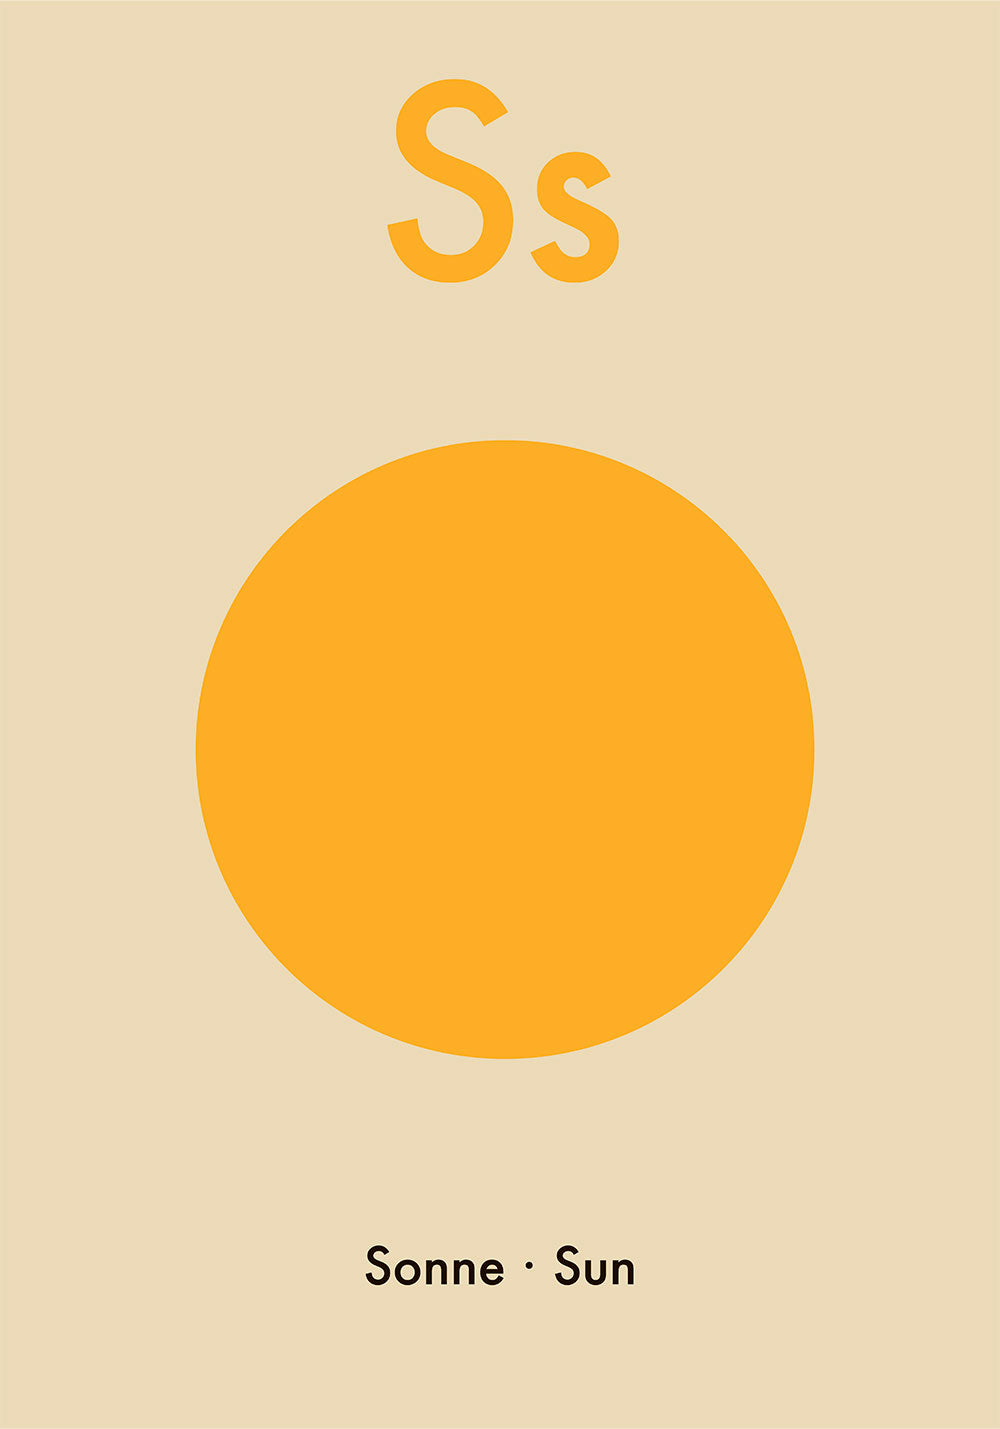 S for Sun Children's Alphabet Poster in German and English